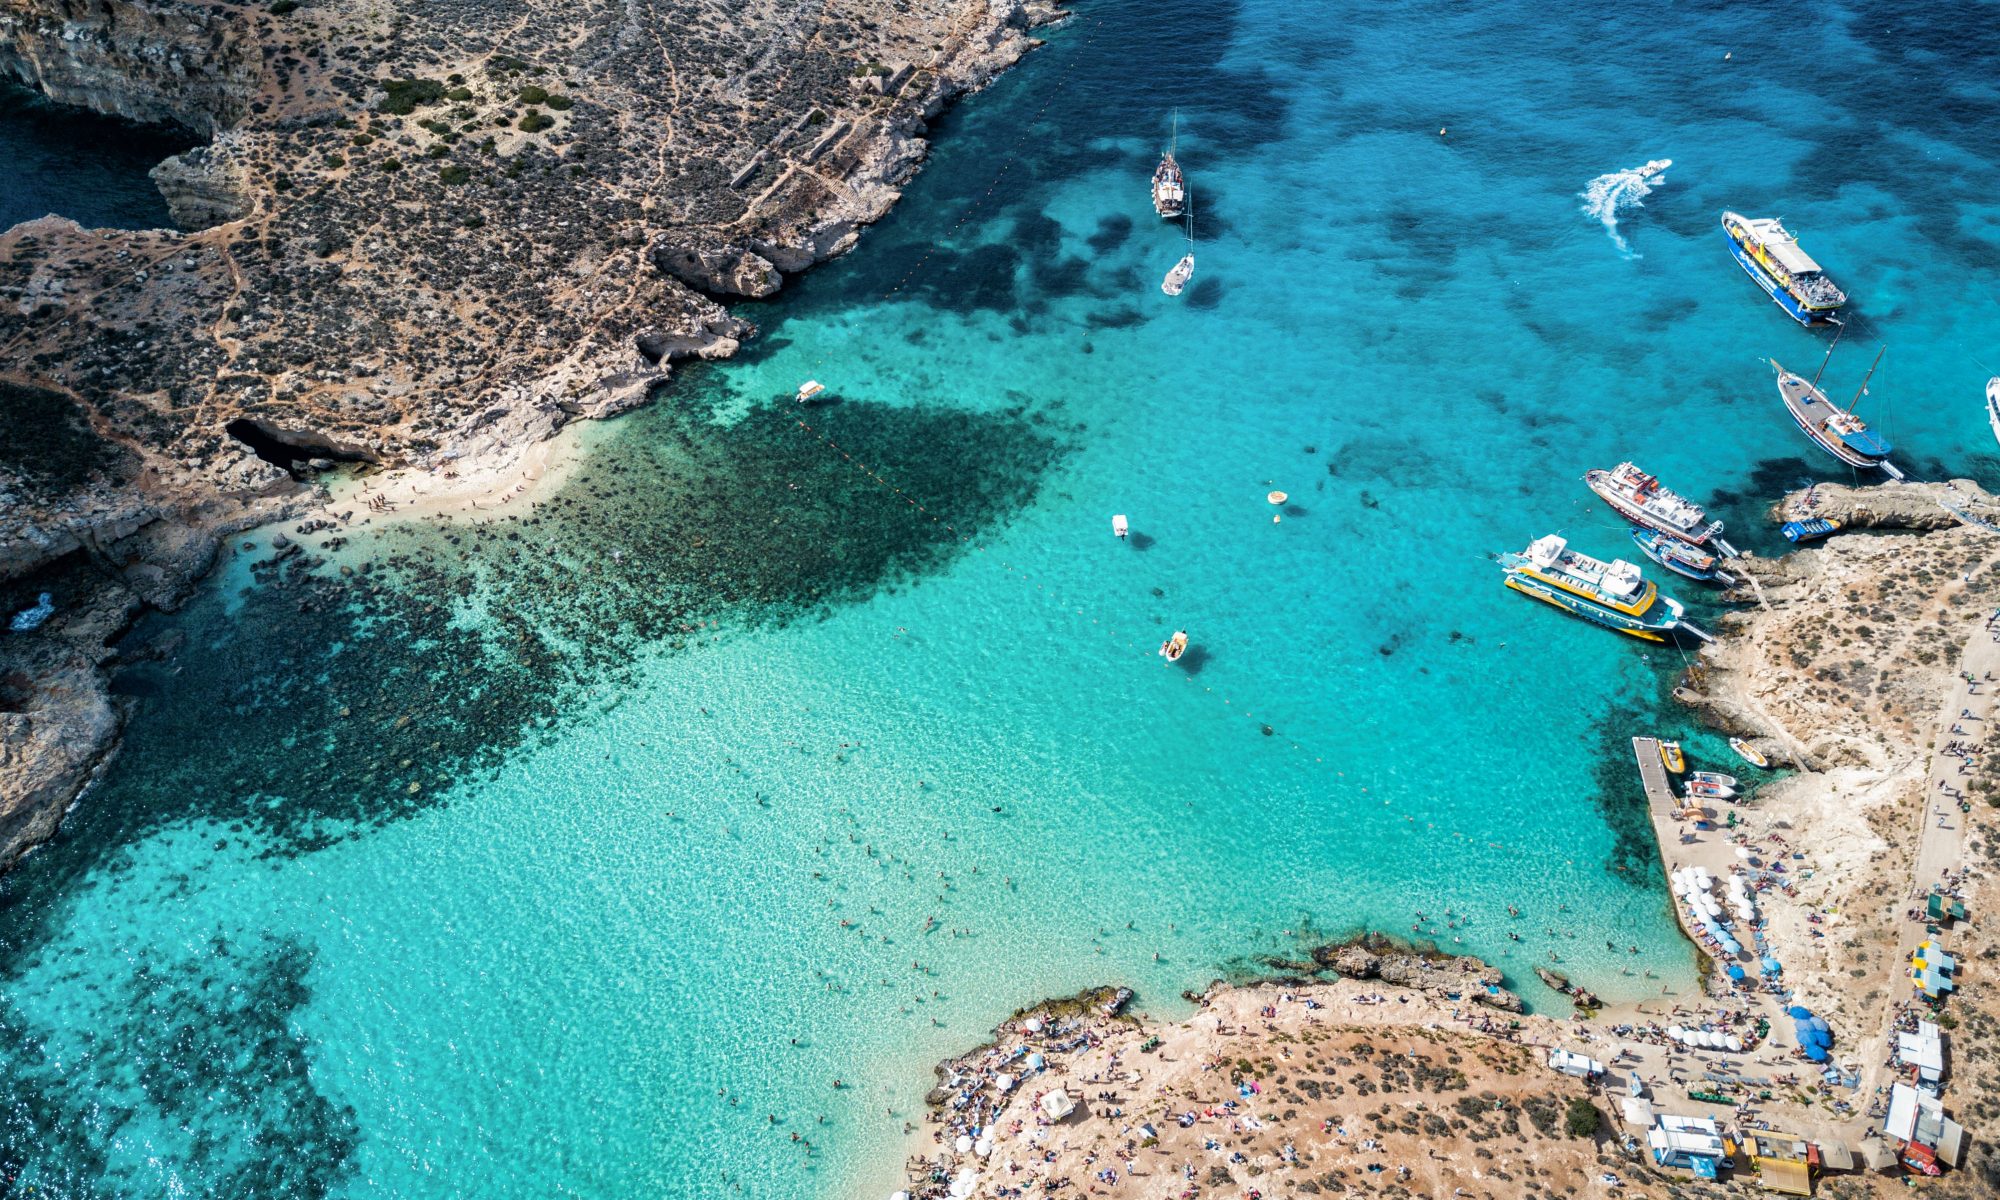 View of the Blue Lagoon in Comino where boat tours providers offer boat trips during the summer.